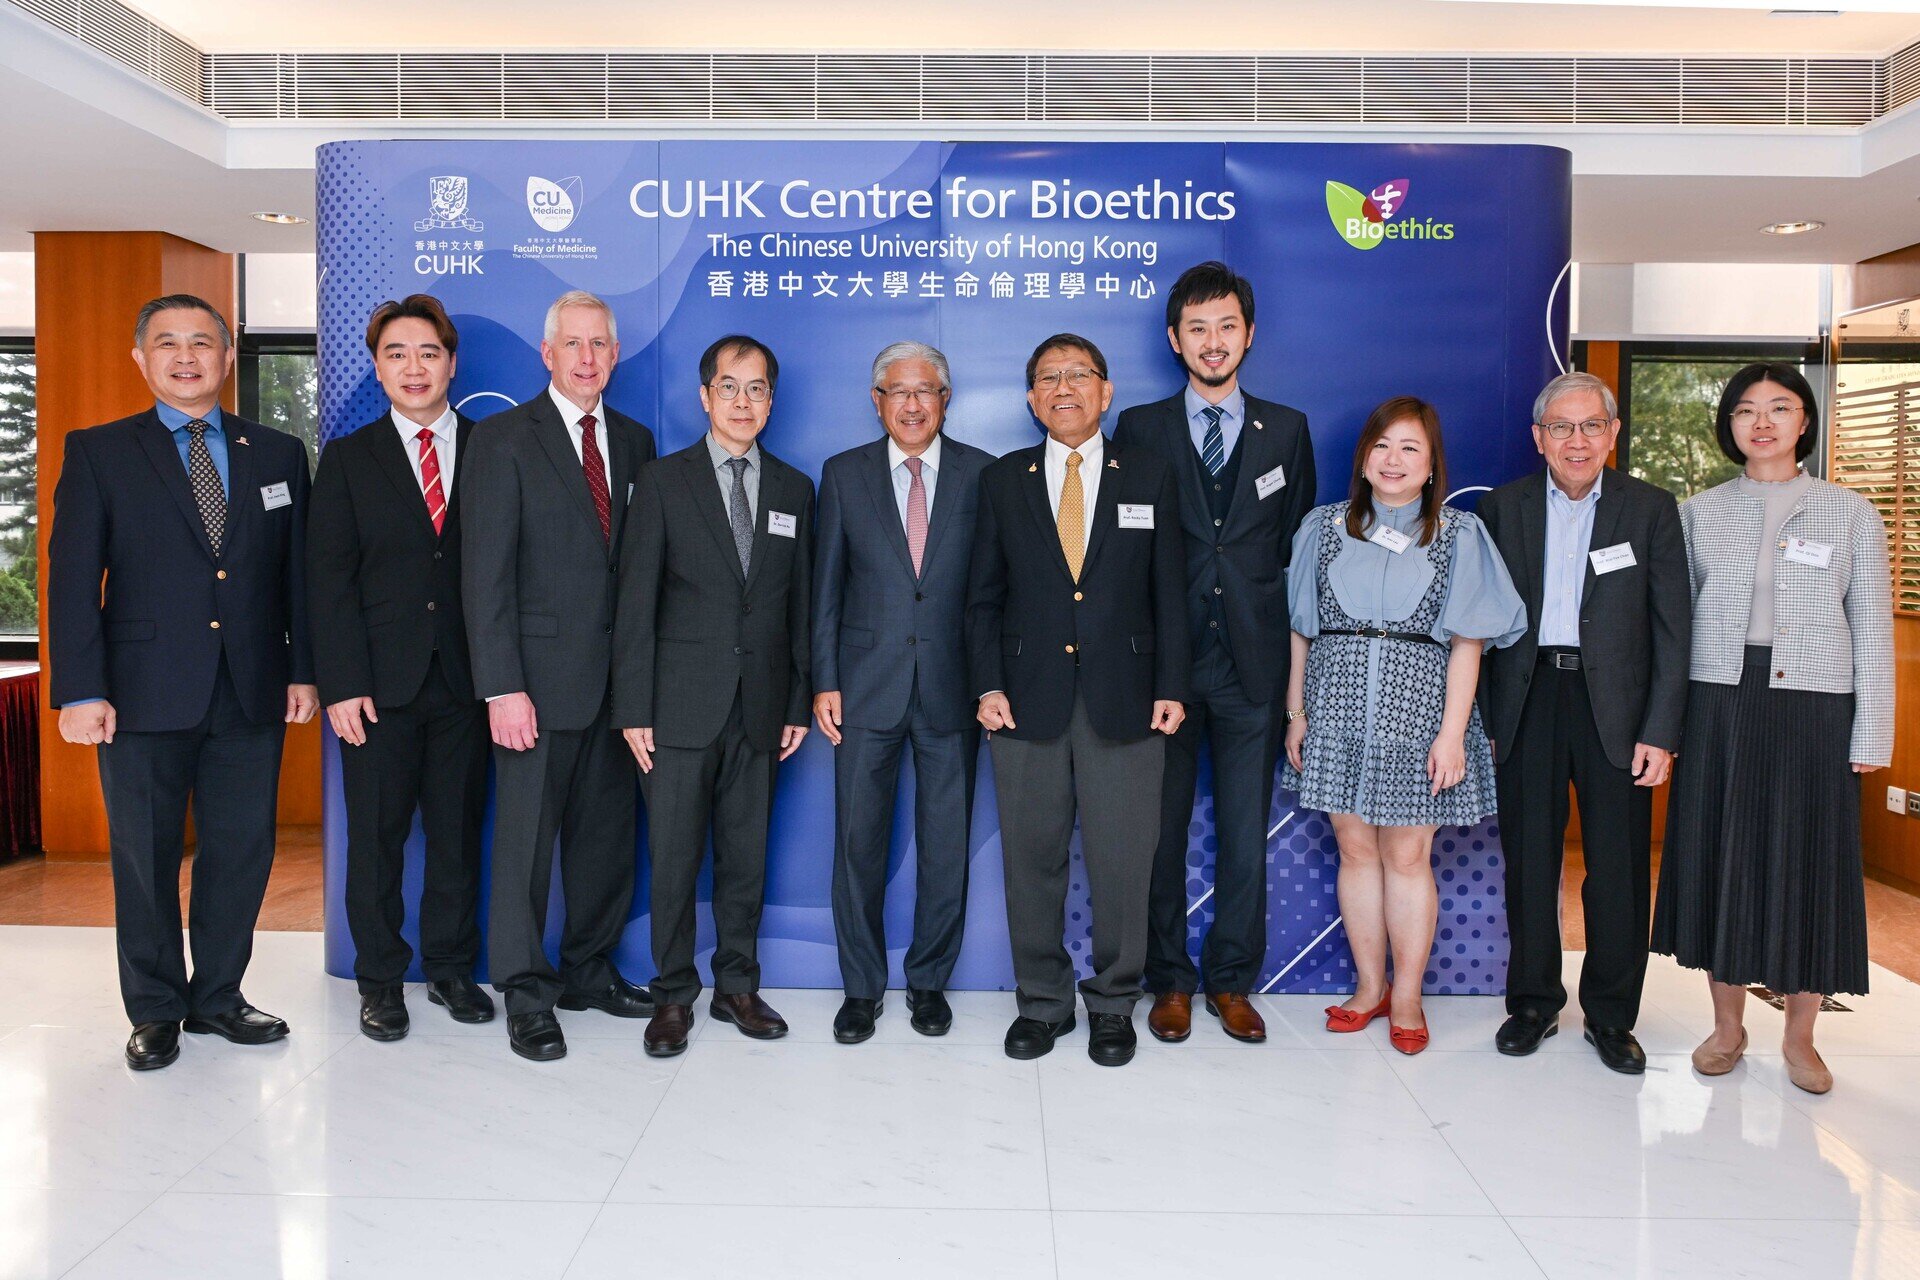 CUHK holds NAM Distinguished Lecture cum International Health Policy Fellowship Seminar to discuss the opportunities and risks of applying AI in medicine